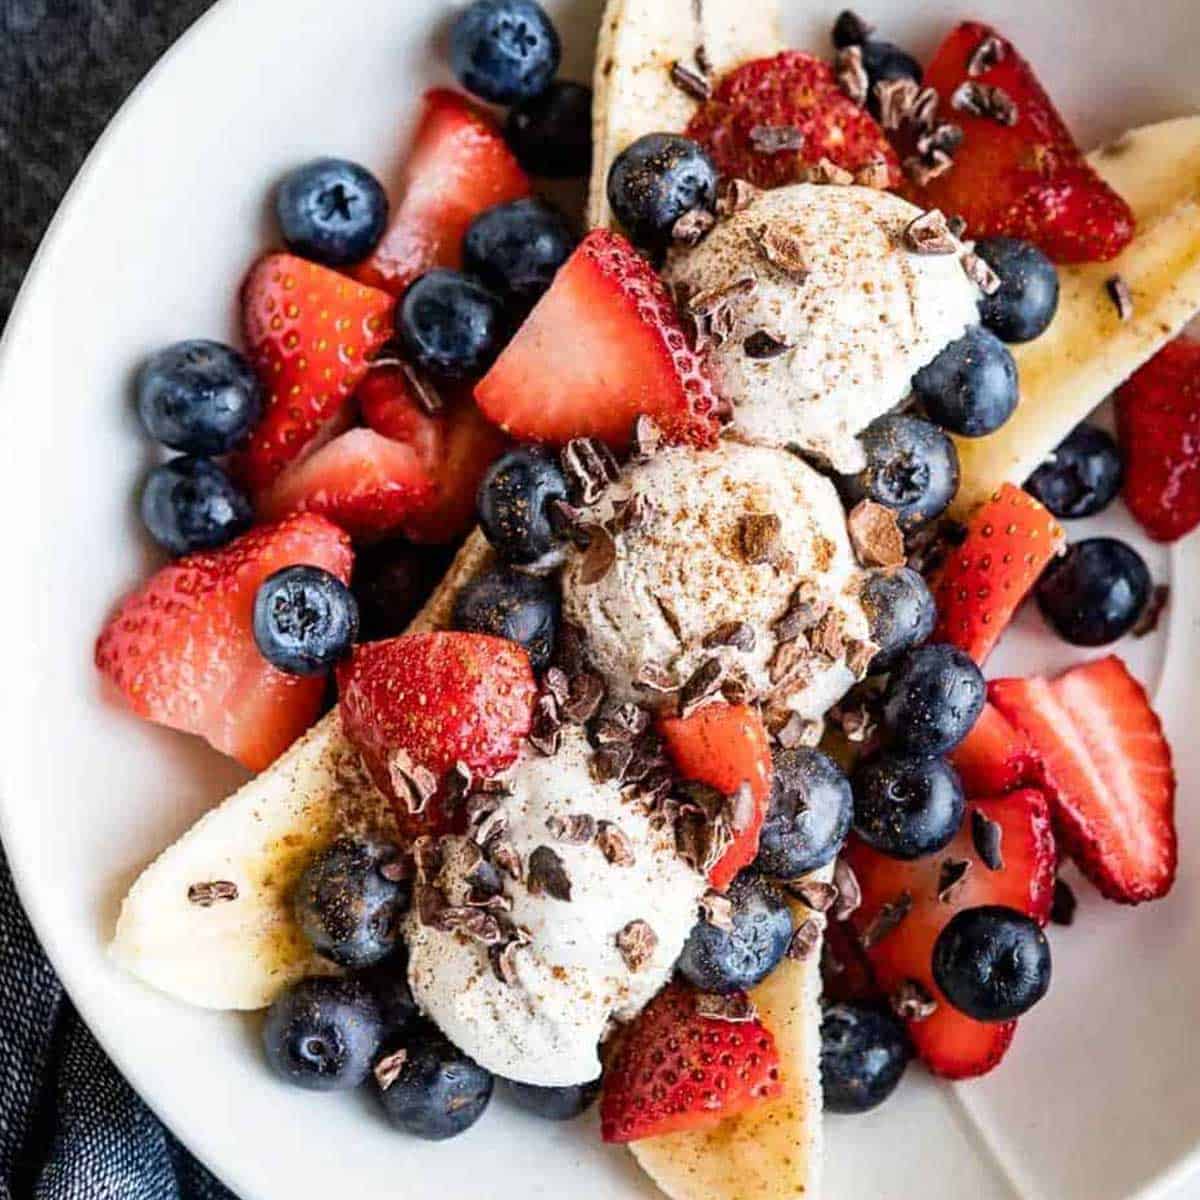 banana split with 3 scoops of ice cream in between a banana sliced in half lengthwise and topped with fresh strawberries, blueberries and cacao nibs.